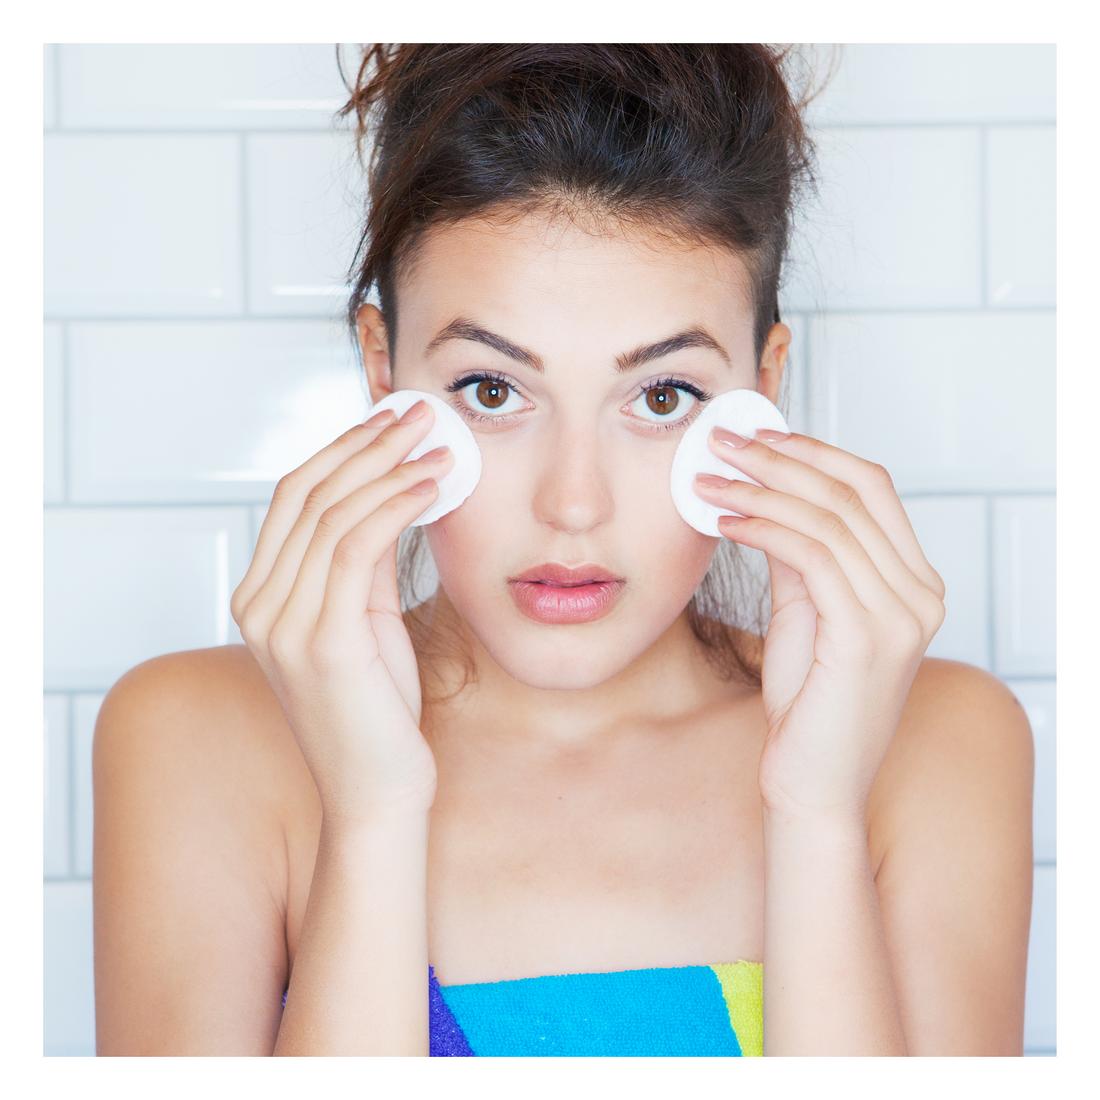 Cleanser Vs Wipes - Why using wipes could be more damaging to your skin.